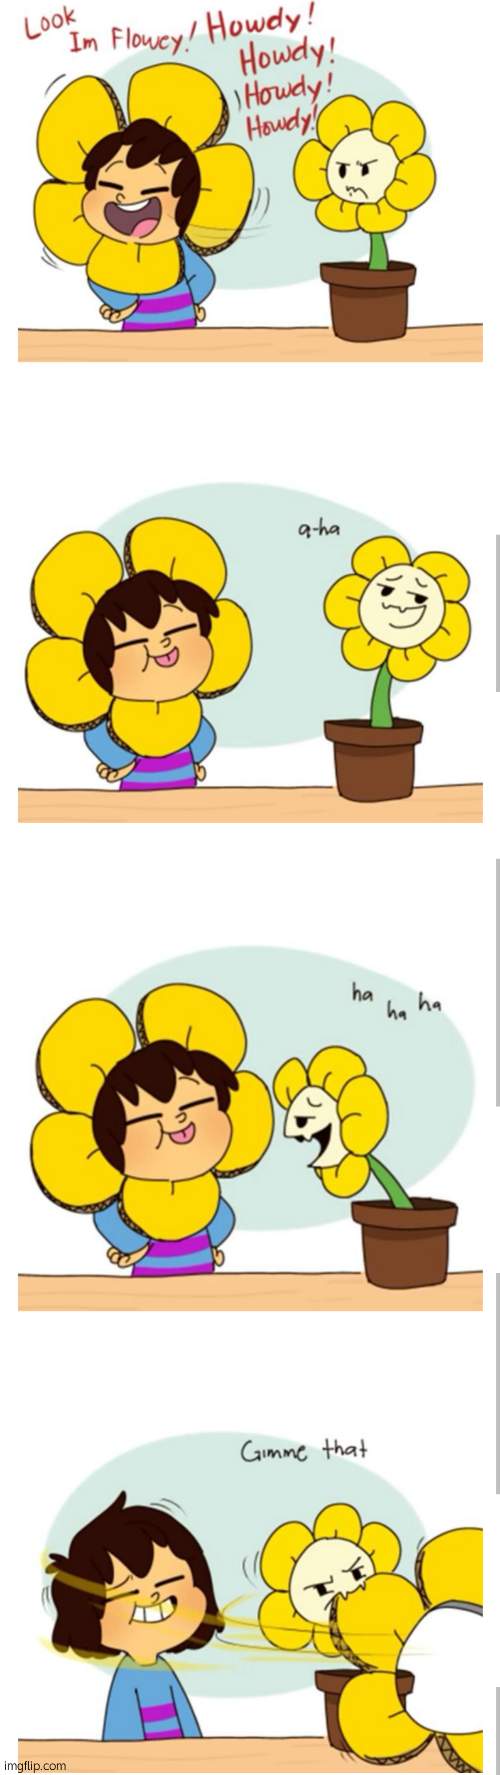 image tagged in look i'm flowey howdy howdy howdy howdy | made w/ Imgflip meme maker